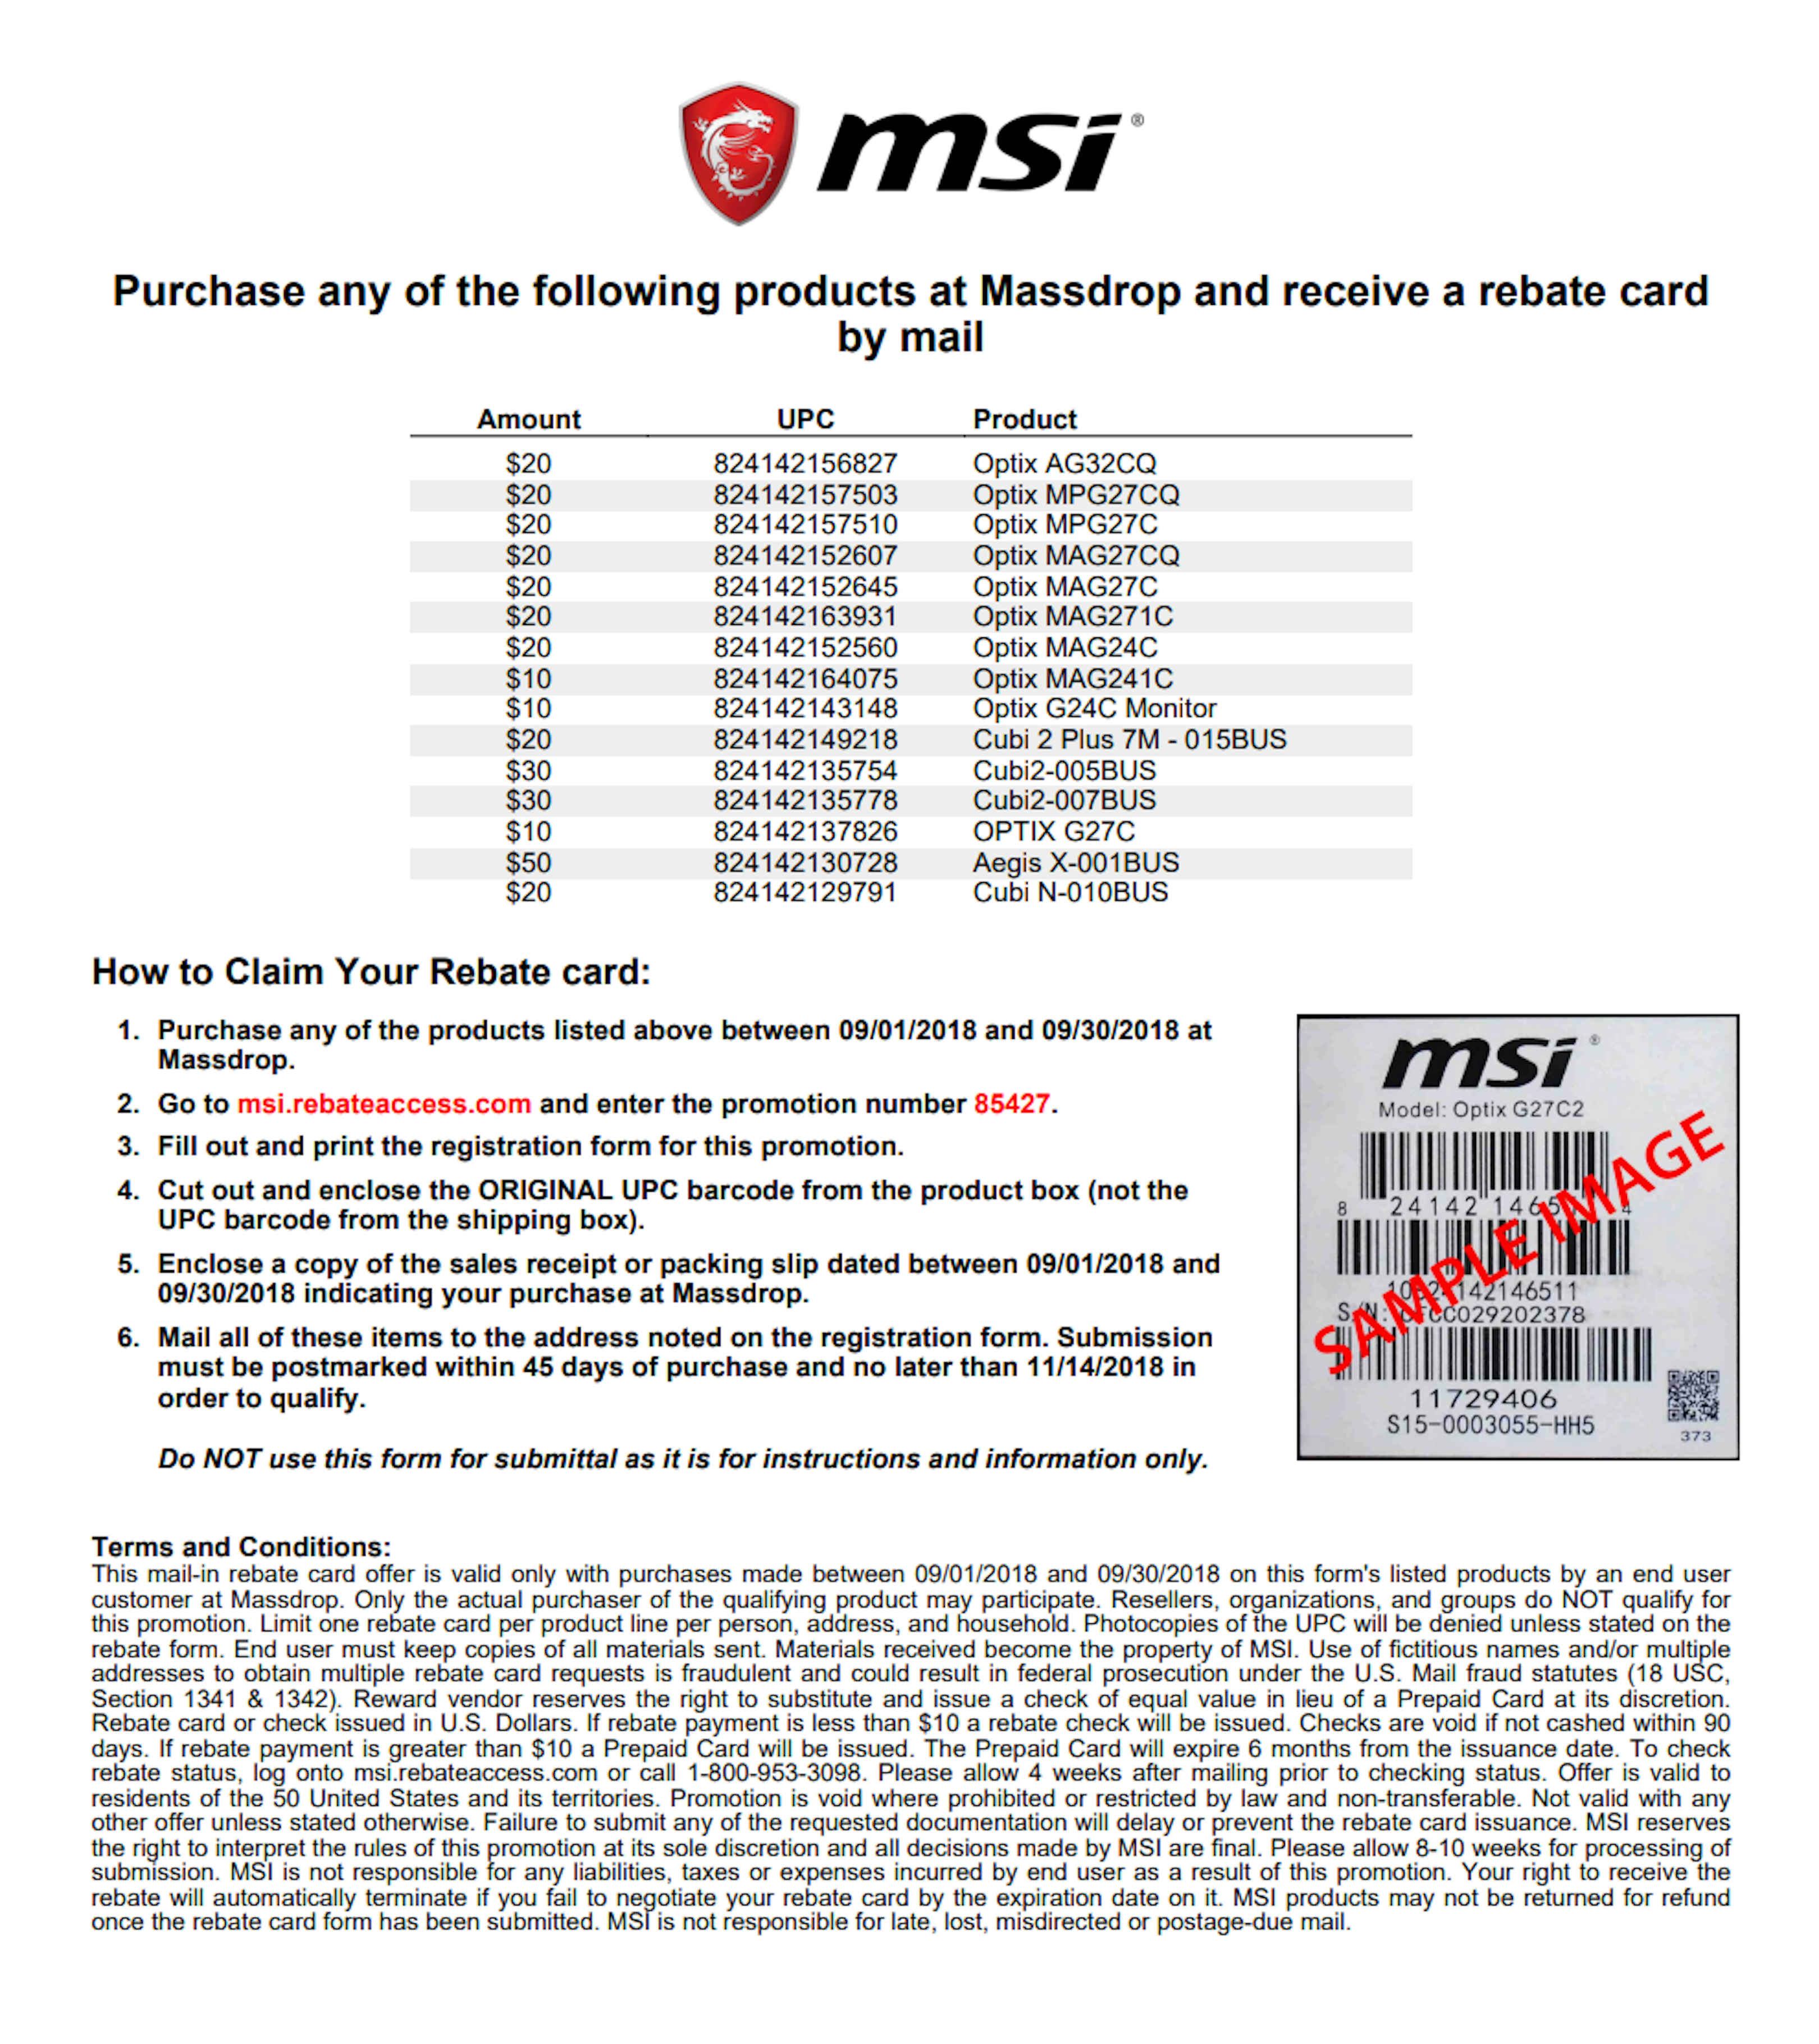 Msi Mail In Rebate Without Upc